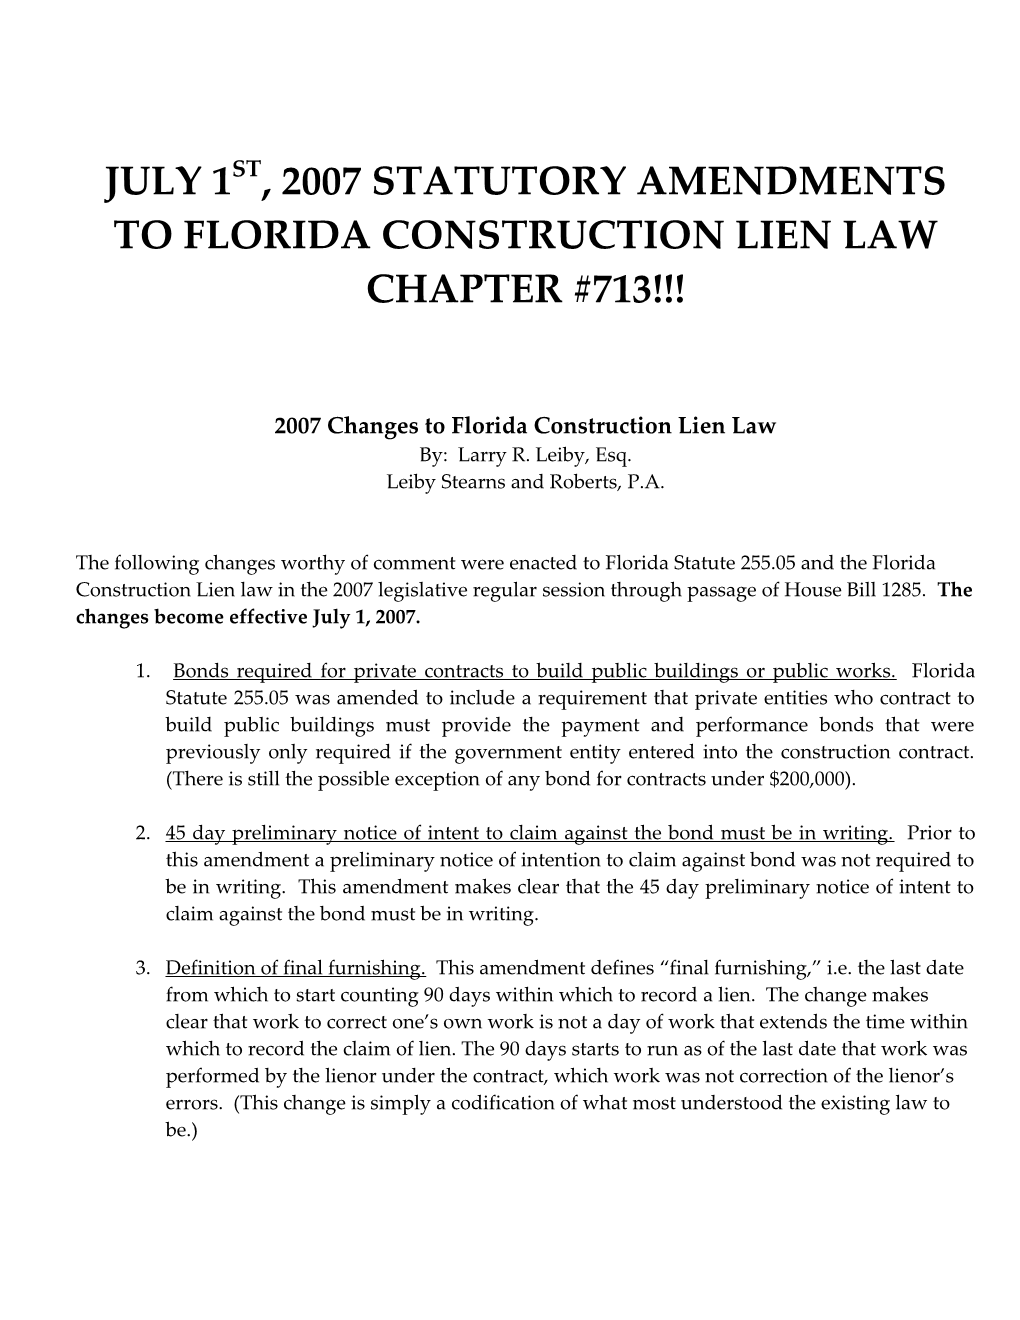 2007 Changes to Florida Construction Lien Law